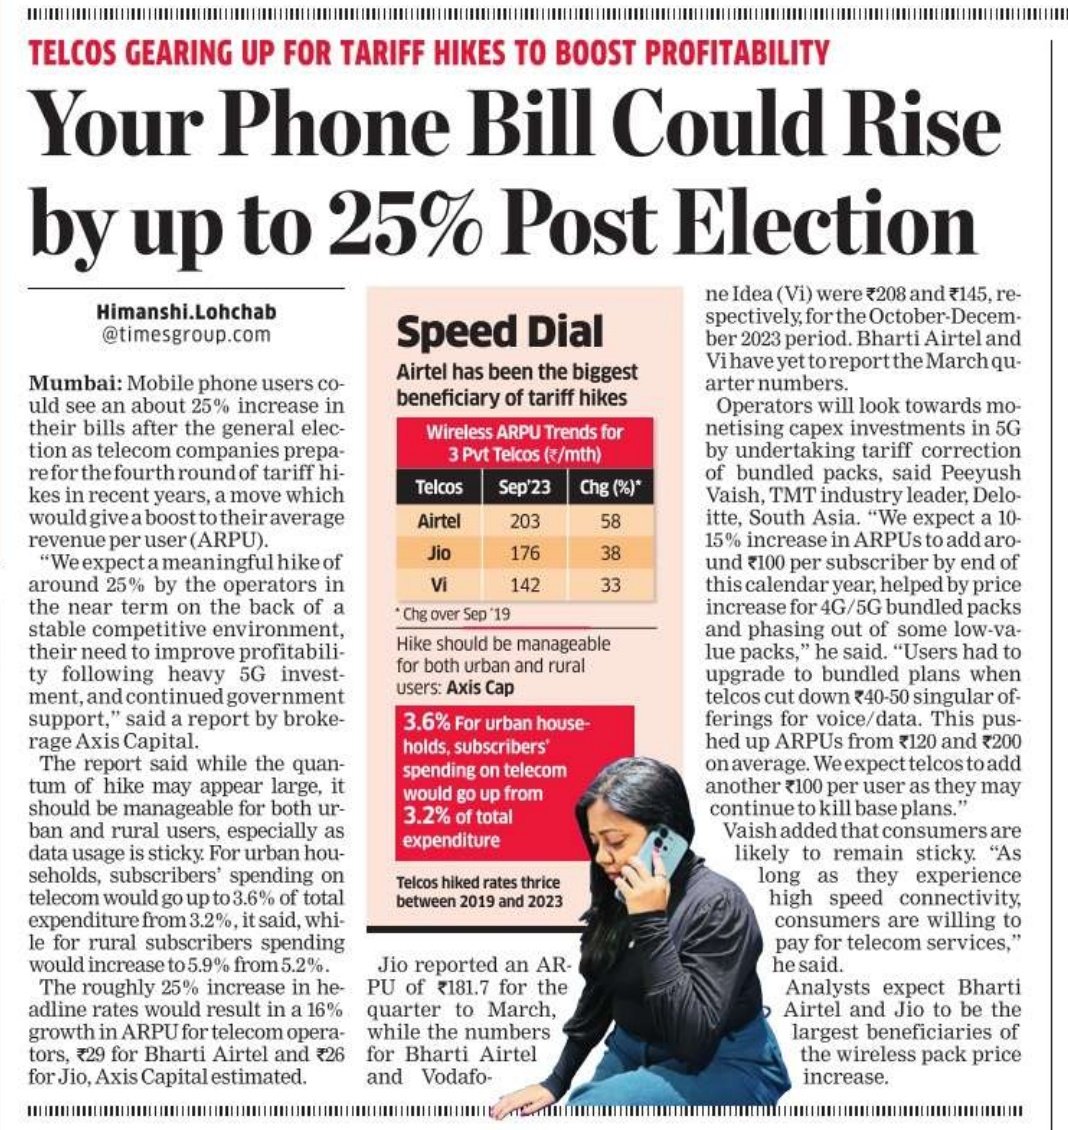 The Indian capitalists are quietly waiting for the elections to end so they can increase their profits by squeezing the public. Brace yourselves, India.